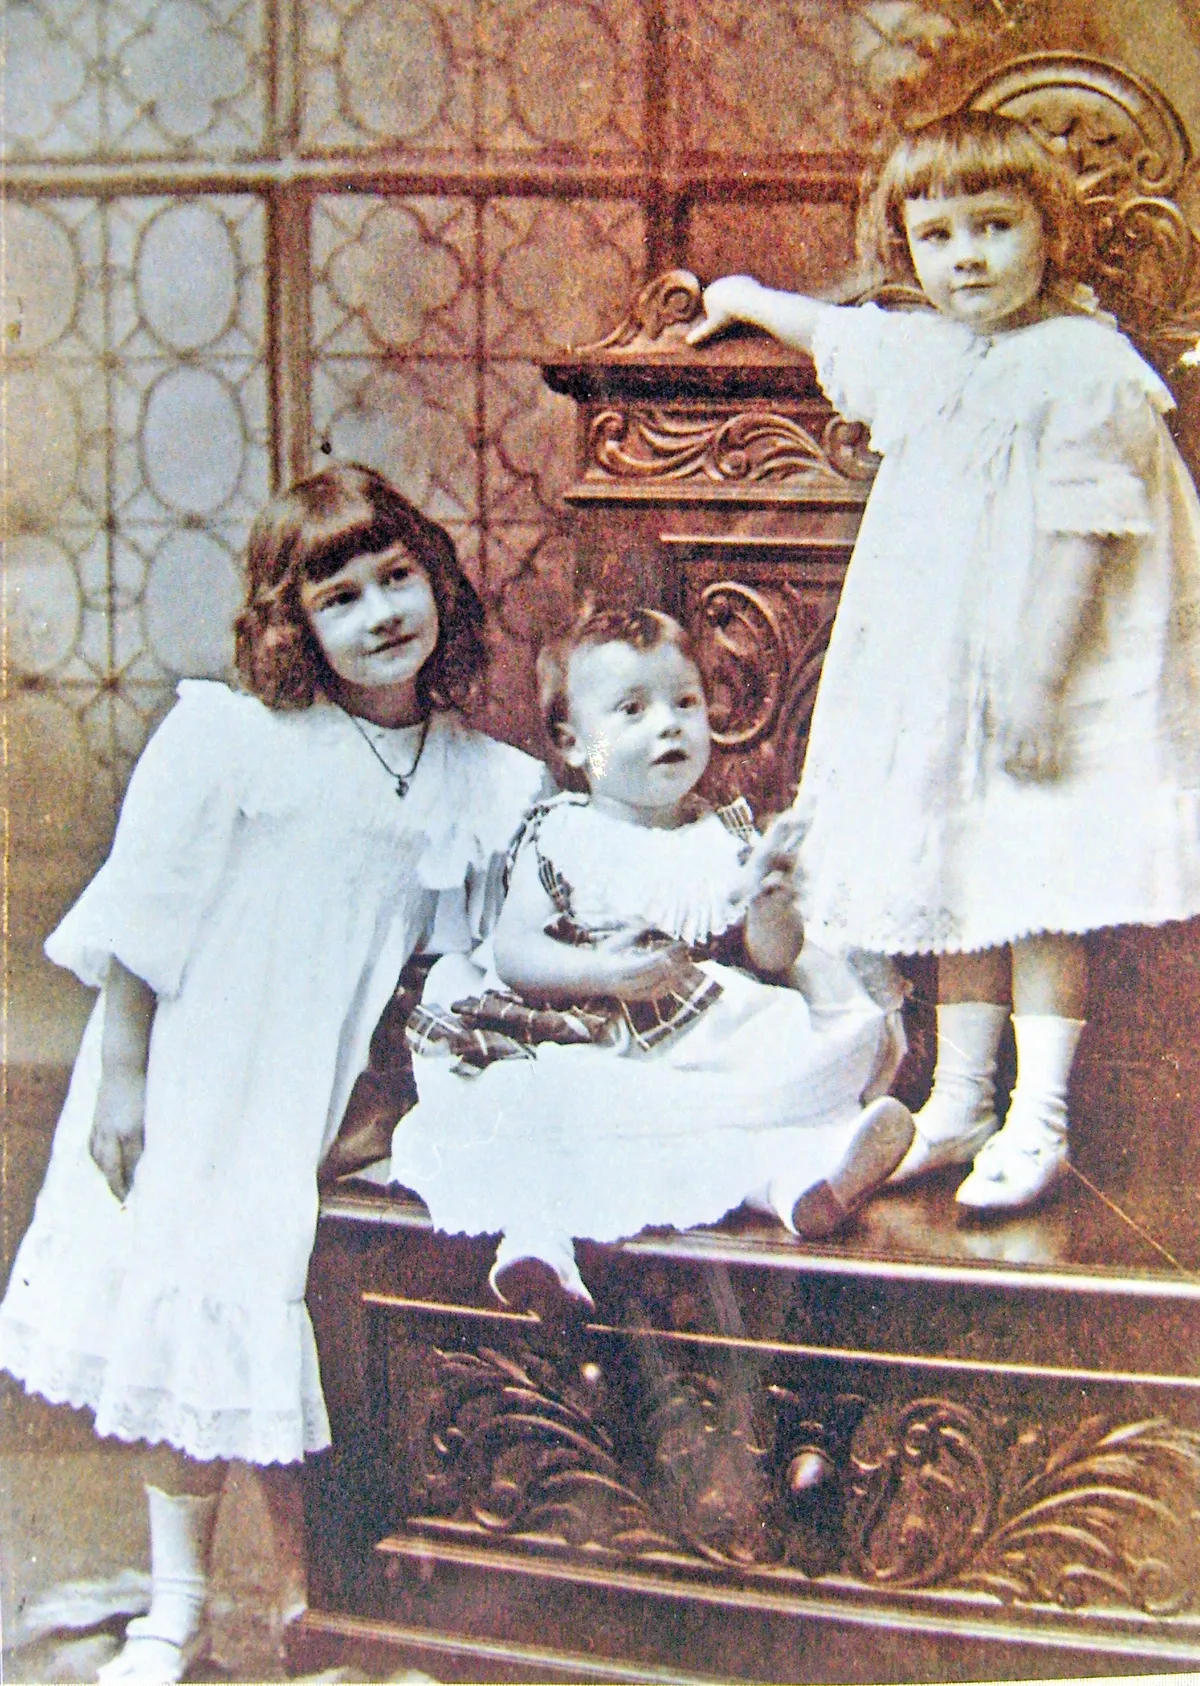 Black and white photograph of three children in old-fashioned white dresses